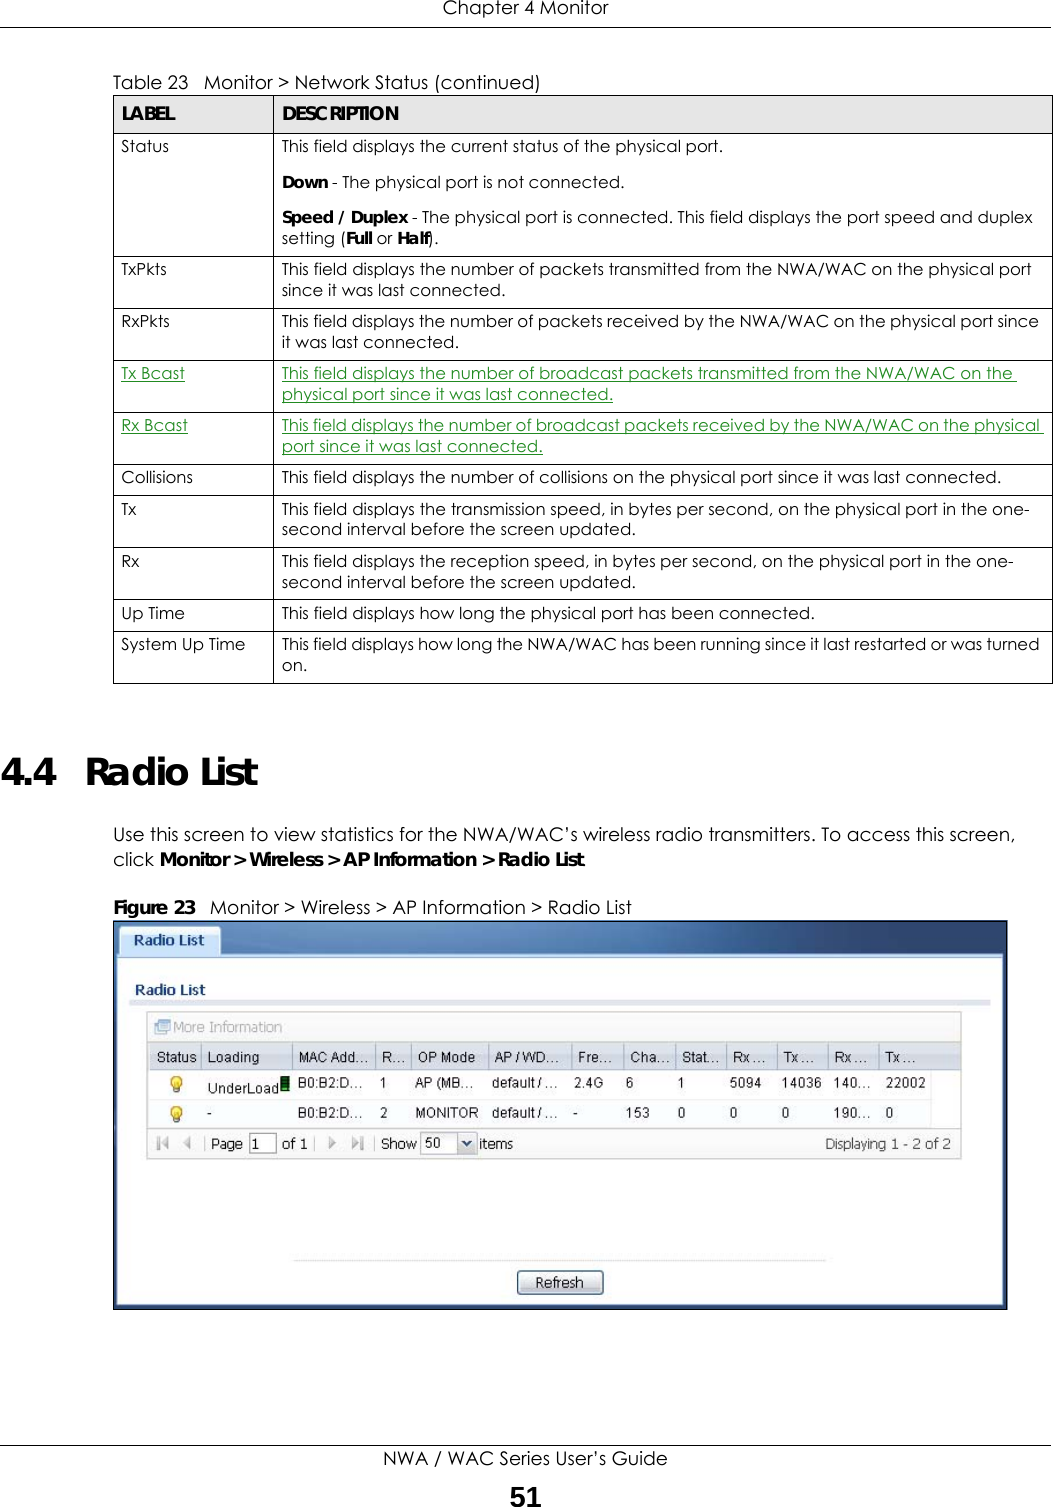 Chapter 4 MonitorNWA / WAC Series User’s Guide514.4   Radio List Use this screen to view statistics for the NWA/WAC’s wireless radio transmitters. To access this screen, click Monitor &gt; Wireless &gt; AP Information &gt; Radio List.Figure 23   Monitor &gt; Wireless &gt; AP Information &gt; Radio List    Status This field displays the current status of the physical port. Down - The physical port is not connected.Speed / Duplex - The physical port is connected. This field displays the port speed and duplex setting (Full or Half).TxPkts This field displays the number of packets transmitted from the NWA/WAC on the physical port since it was last connected.RxPkts This field displays the number of packets received by the NWA/WAC on the physical port since it was last connected.Tx Bcast This field displays the number of broadcast packets transmitted from the NWA/WAC on the physical port since it was last connected.Rx Bcast This field displays the number of broadcast packets received by the NWA/WAC on the physical port since it was last connected.Collisions This field displays the number of collisions on the physical port since it was last connected.Tx This field displays the transmission speed, in bytes per second, on the physical port in the one-second interval before the screen updated.Rx This field displays the reception speed, in bytes per second, on the physical port in the one-second interval before the screen updated.Up Time This field displays how long the physical port has been connected.System Up Time This field displays how long the NWA/WAC has been running since it last restarted or was turned on.Table 23   Monitor &gt; Network Status (continued)LABEL DESCRIPTION